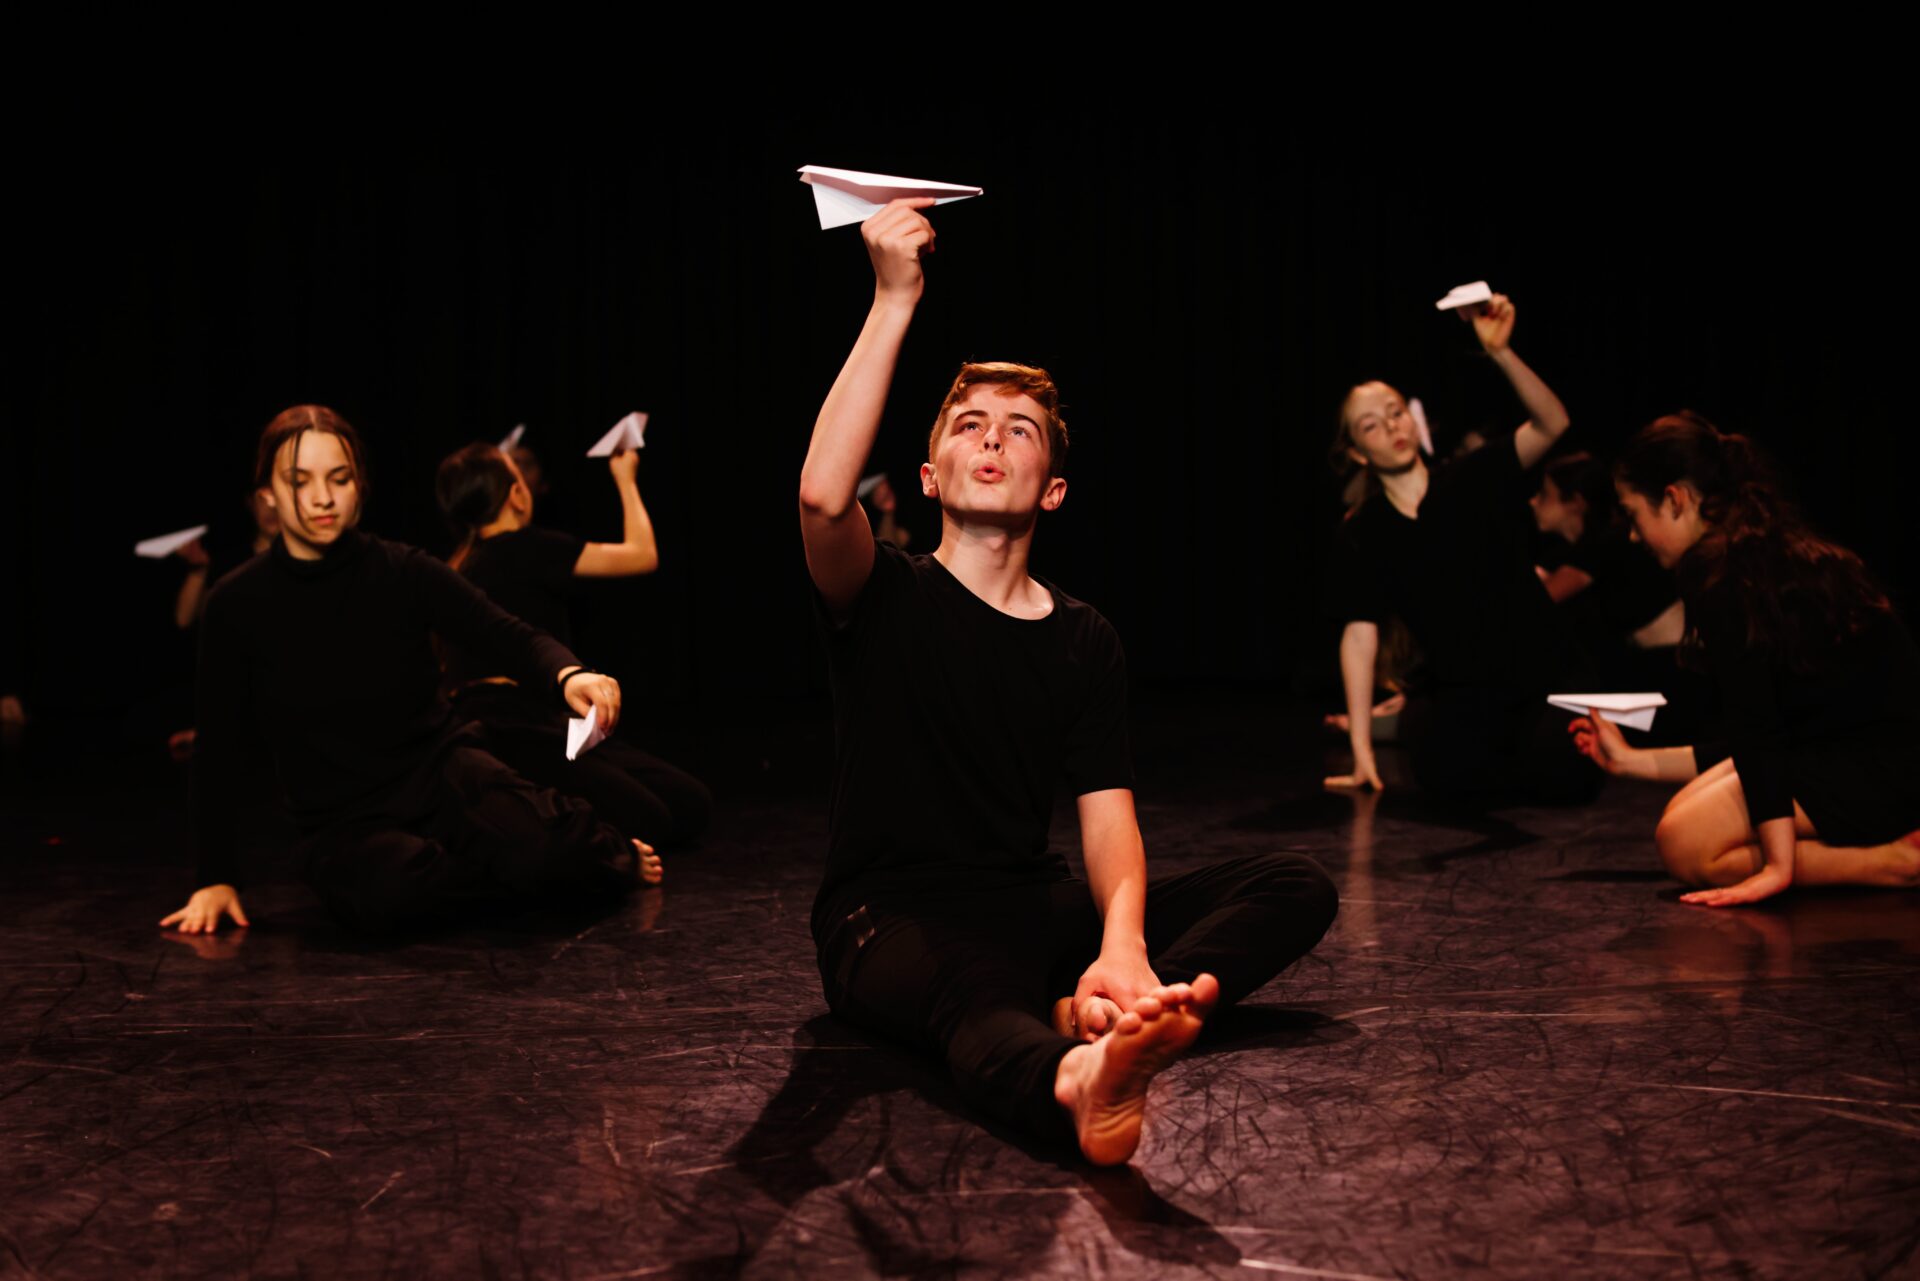 Junior Youth Ensemble dancer onstage at Sydney Dance Company's Neilson Studio.